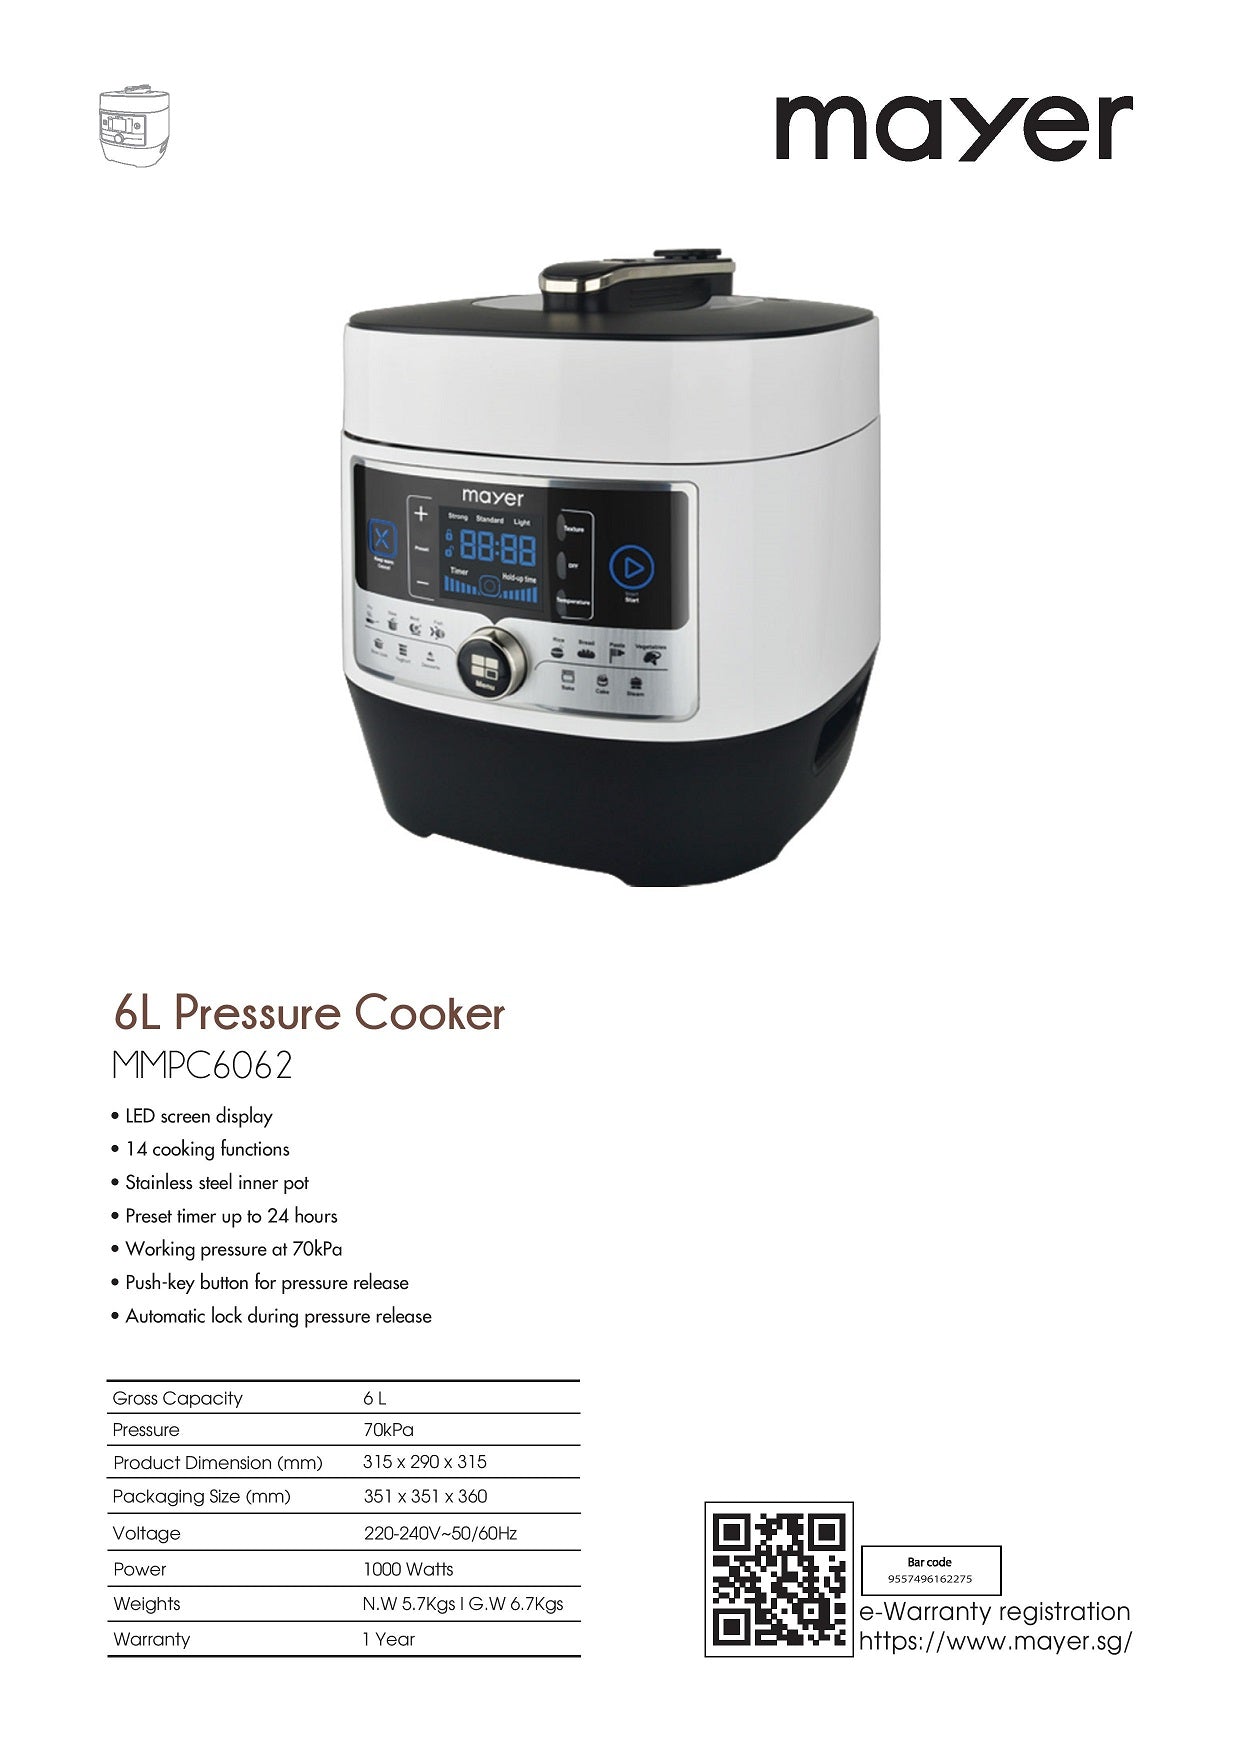 Mayer MMPC6062A 14 Cooking Function Pressure Cooker 6L